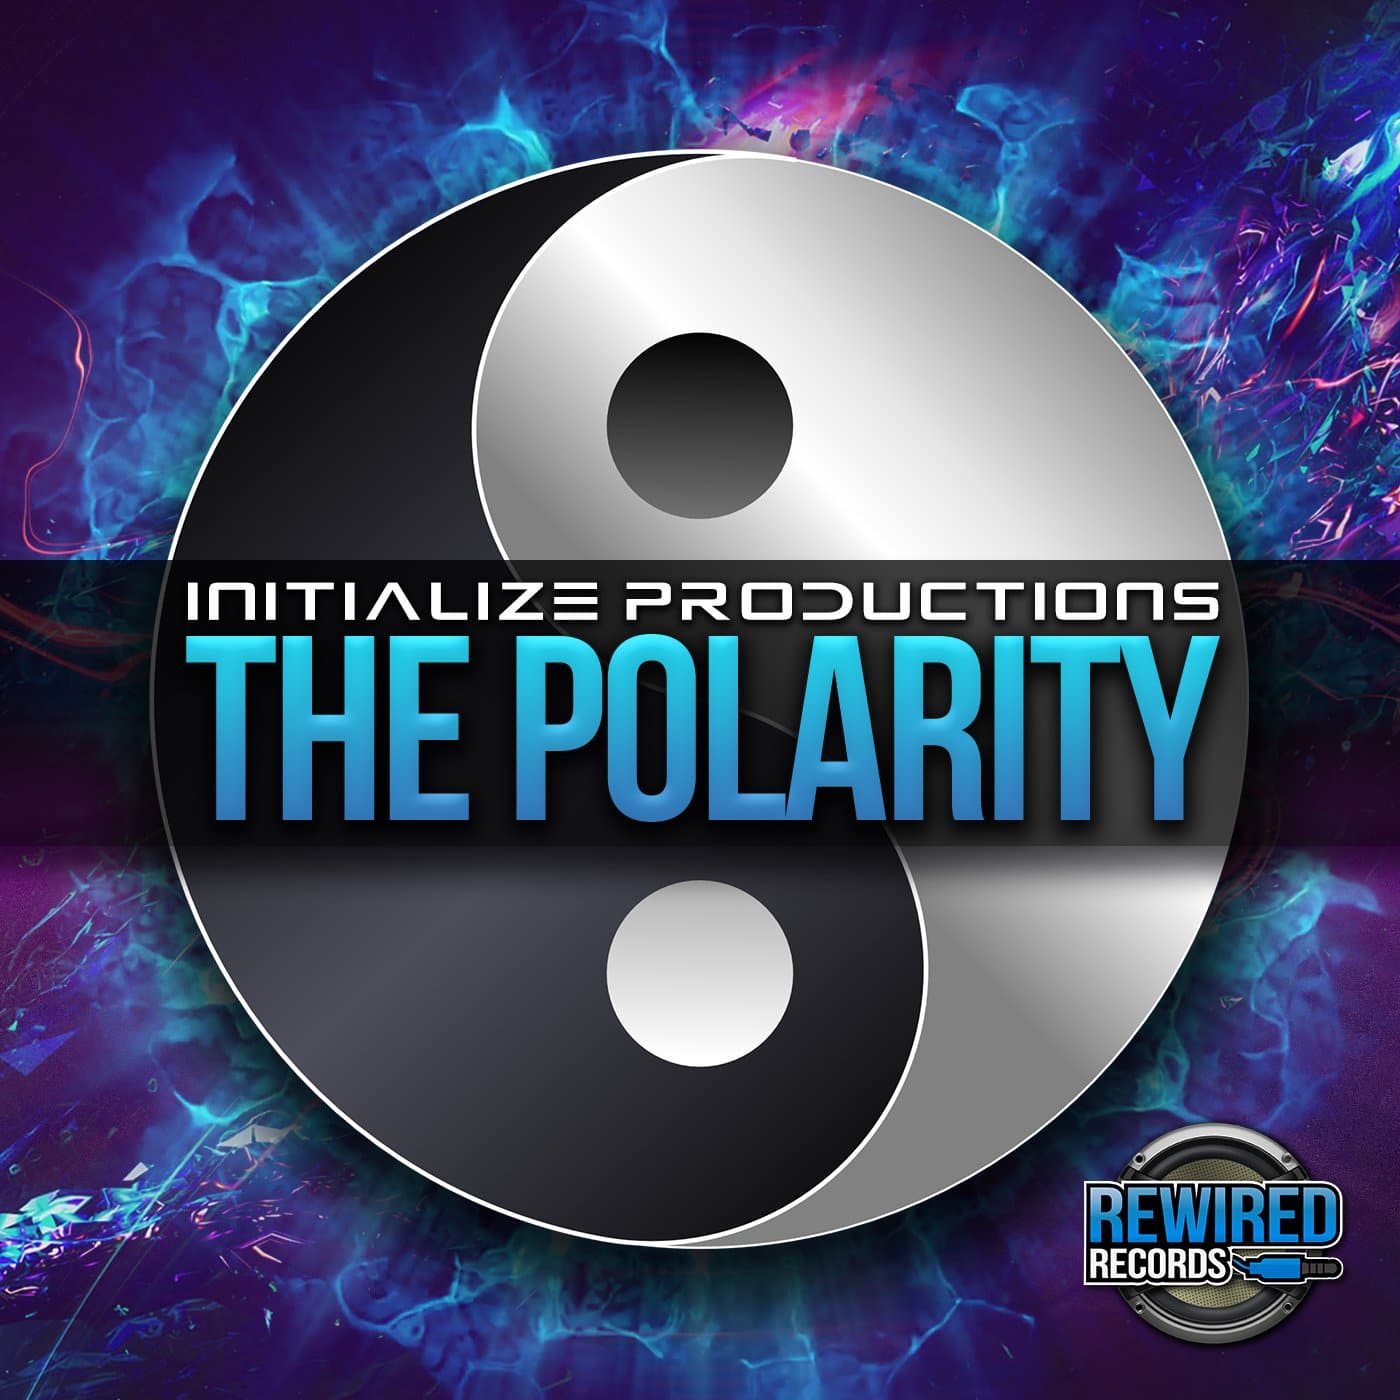 Initialize Productions - The Polarity - Rewired Records